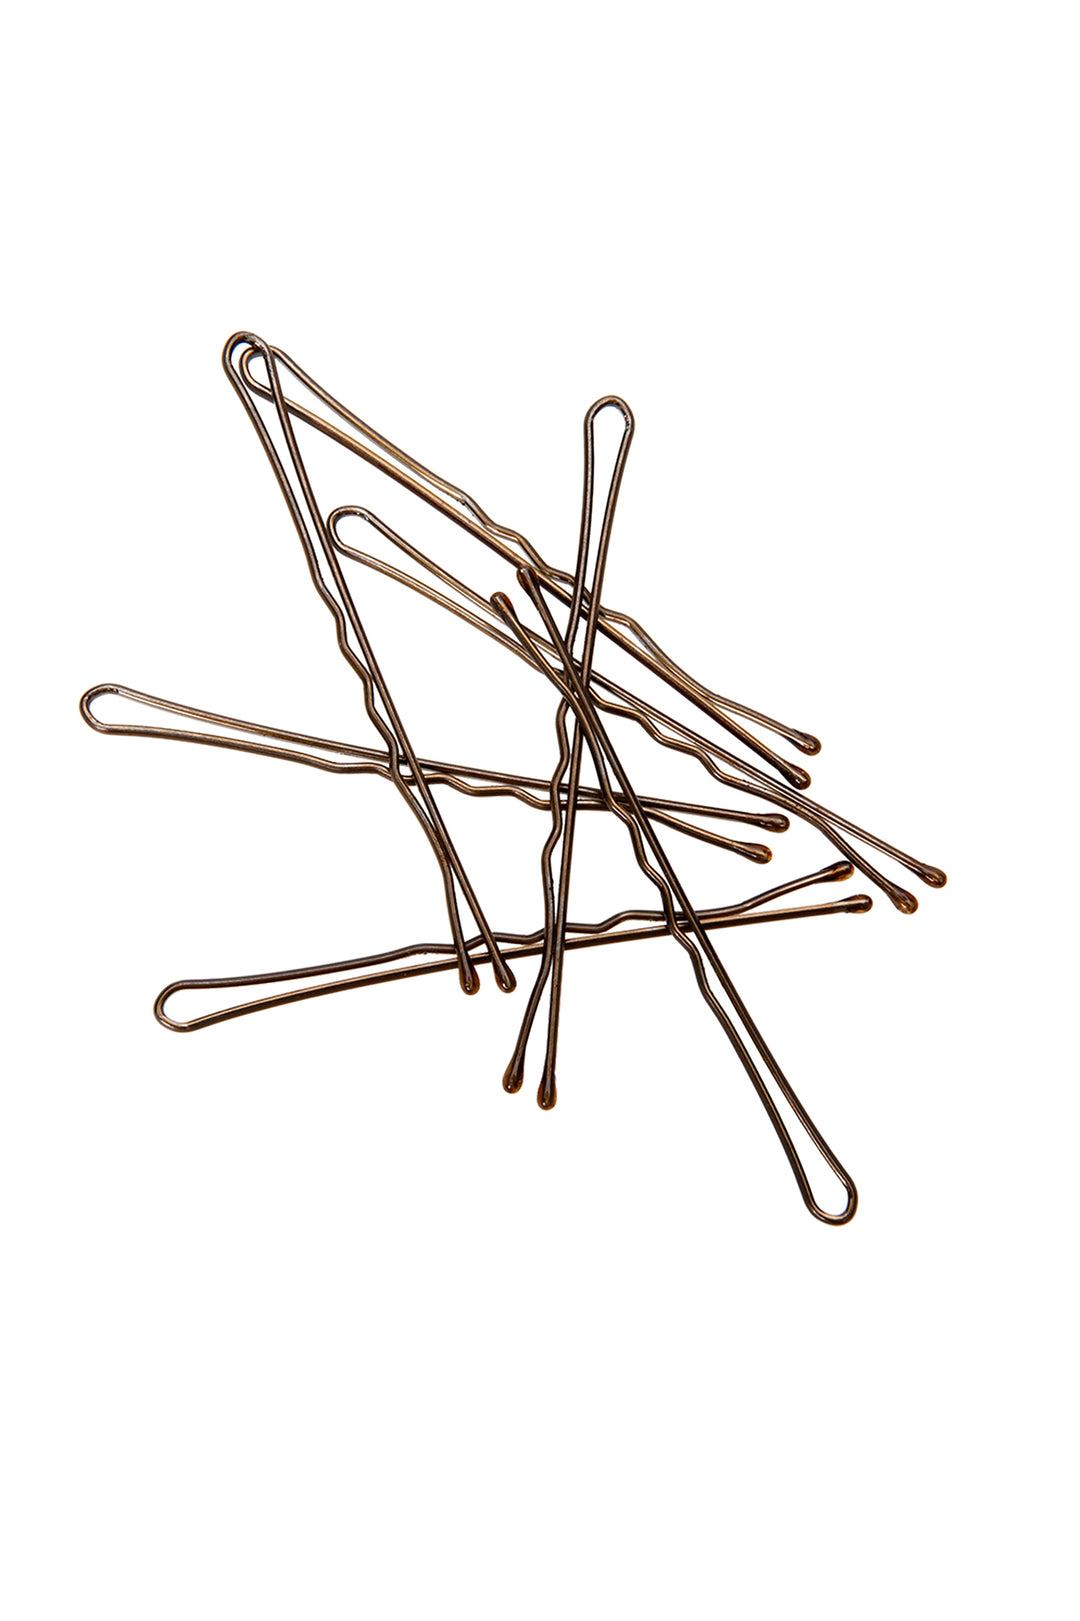 Bobby Pins 300 Ct By Marilyn Brush Non Twist